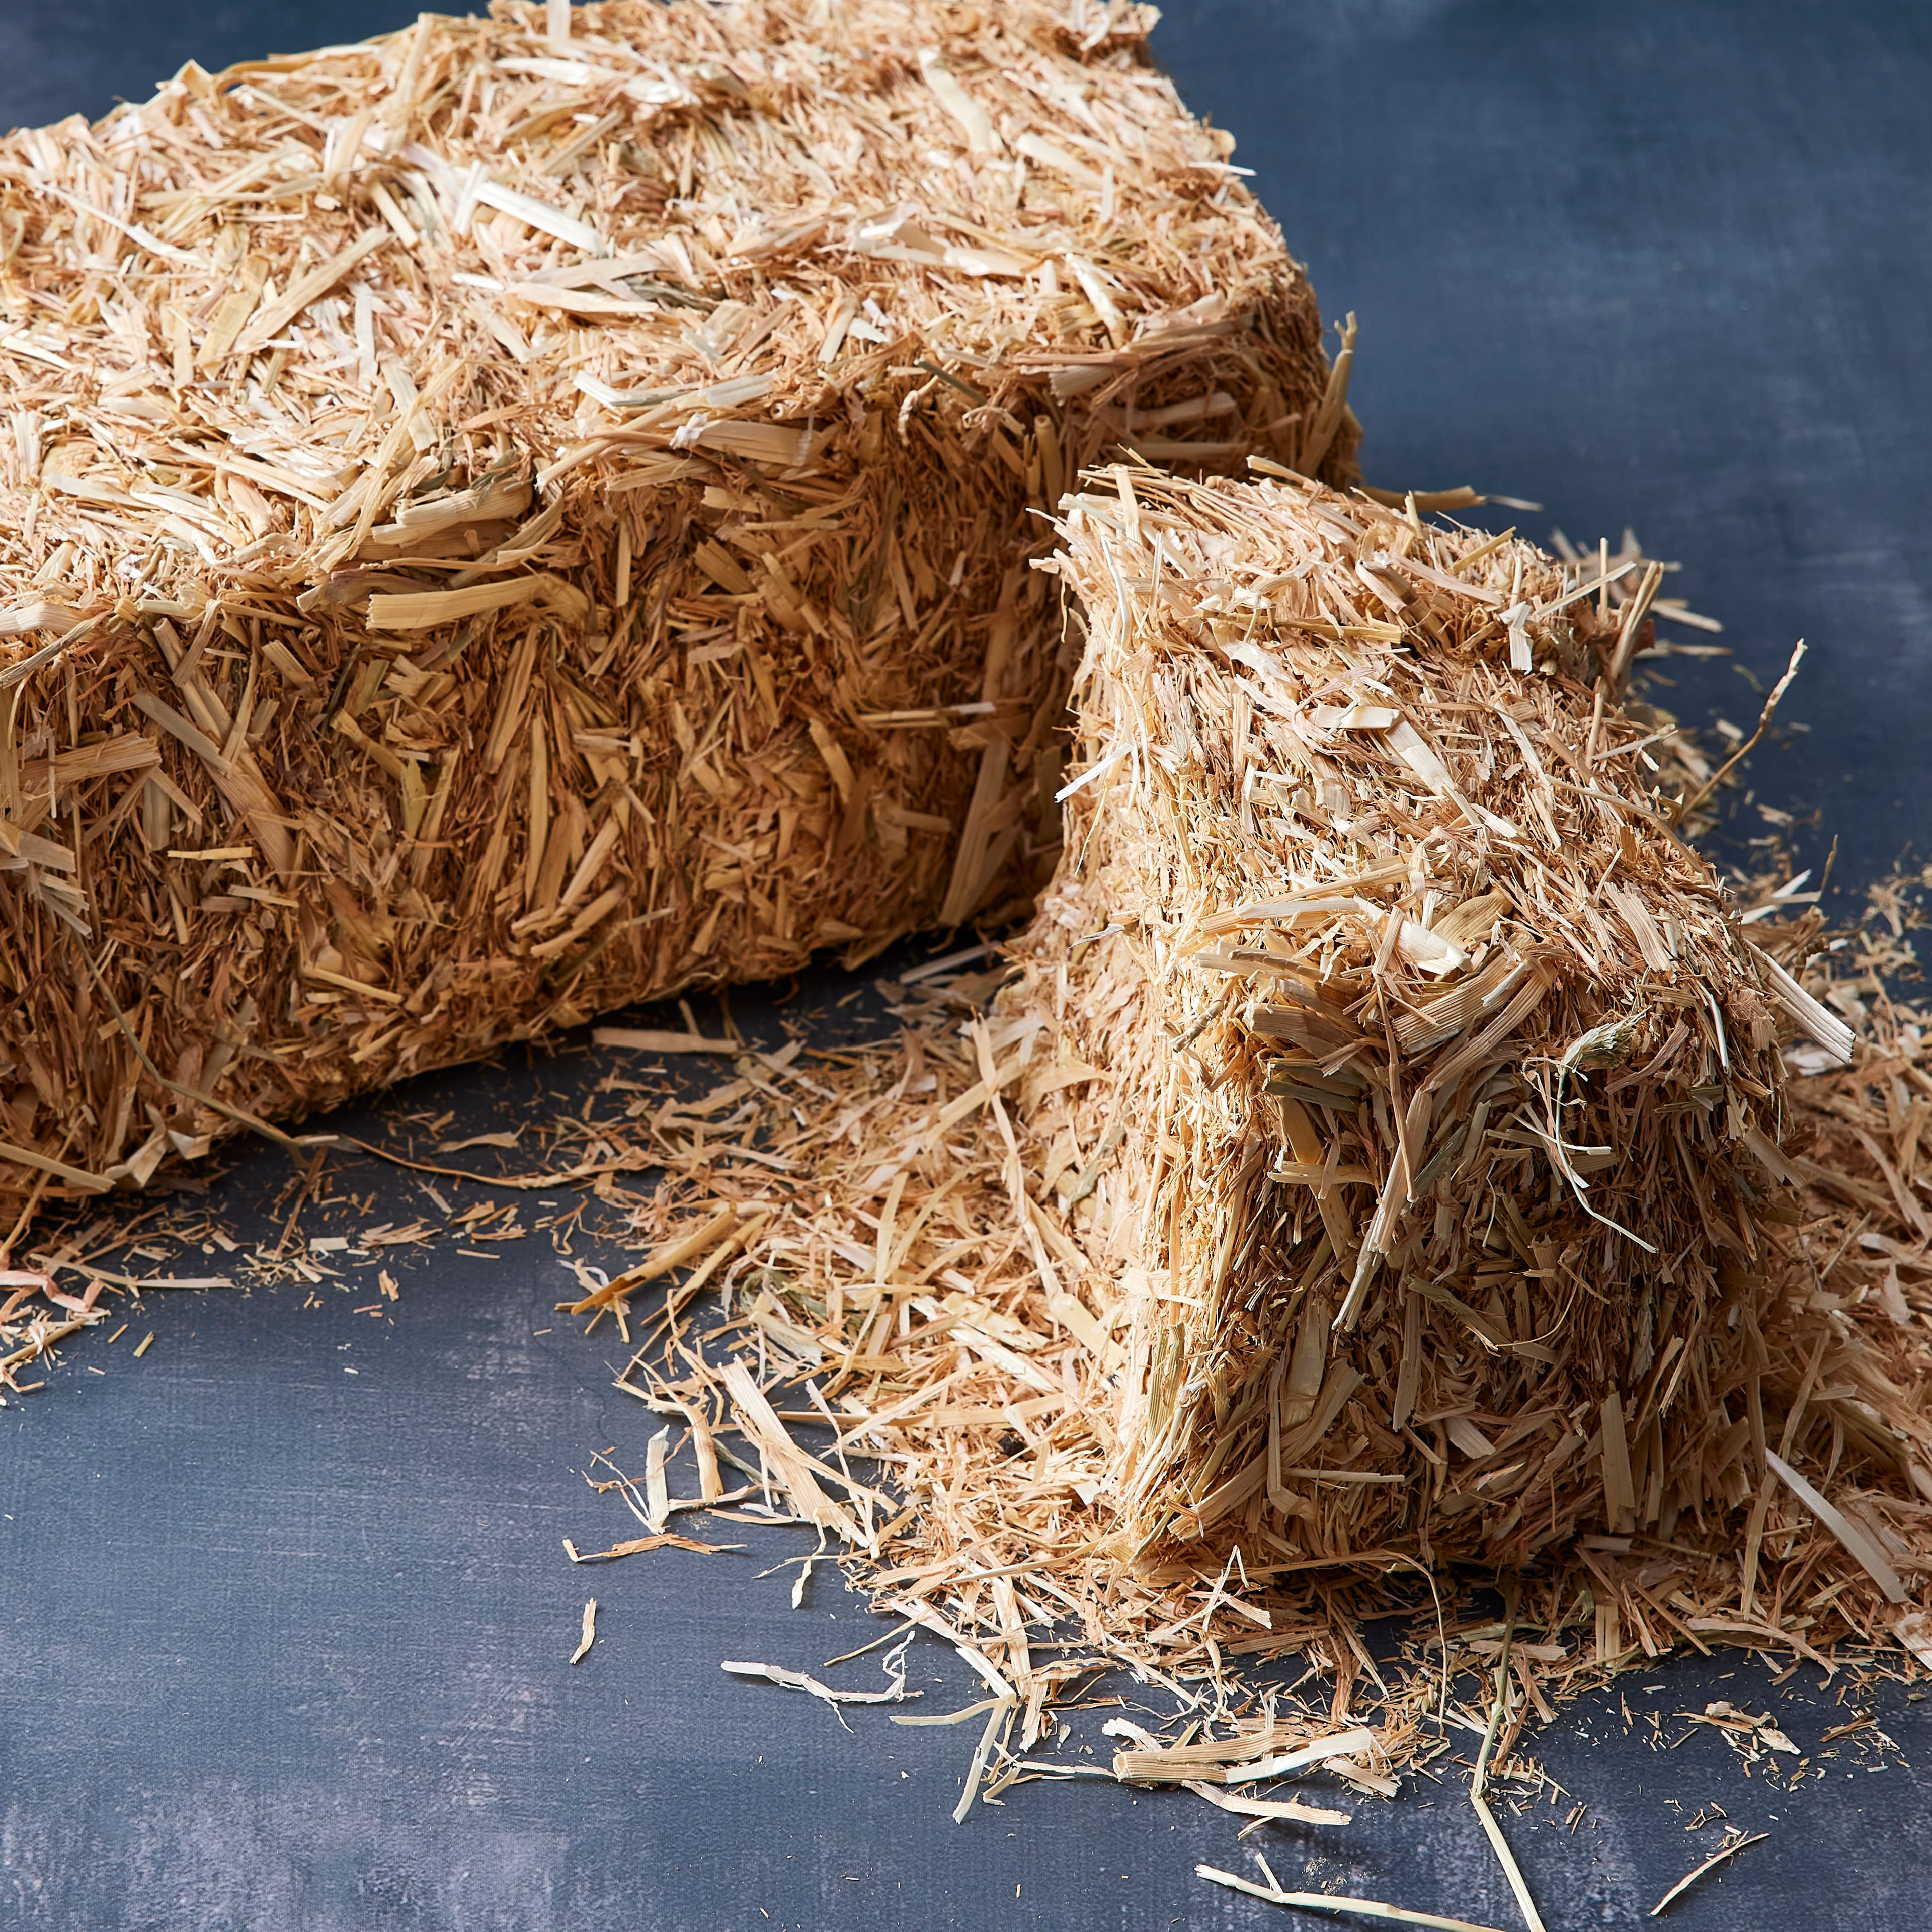 Decorative Straw Bale by Ashland in Natural | 13 x 6 x 5 | Michaels